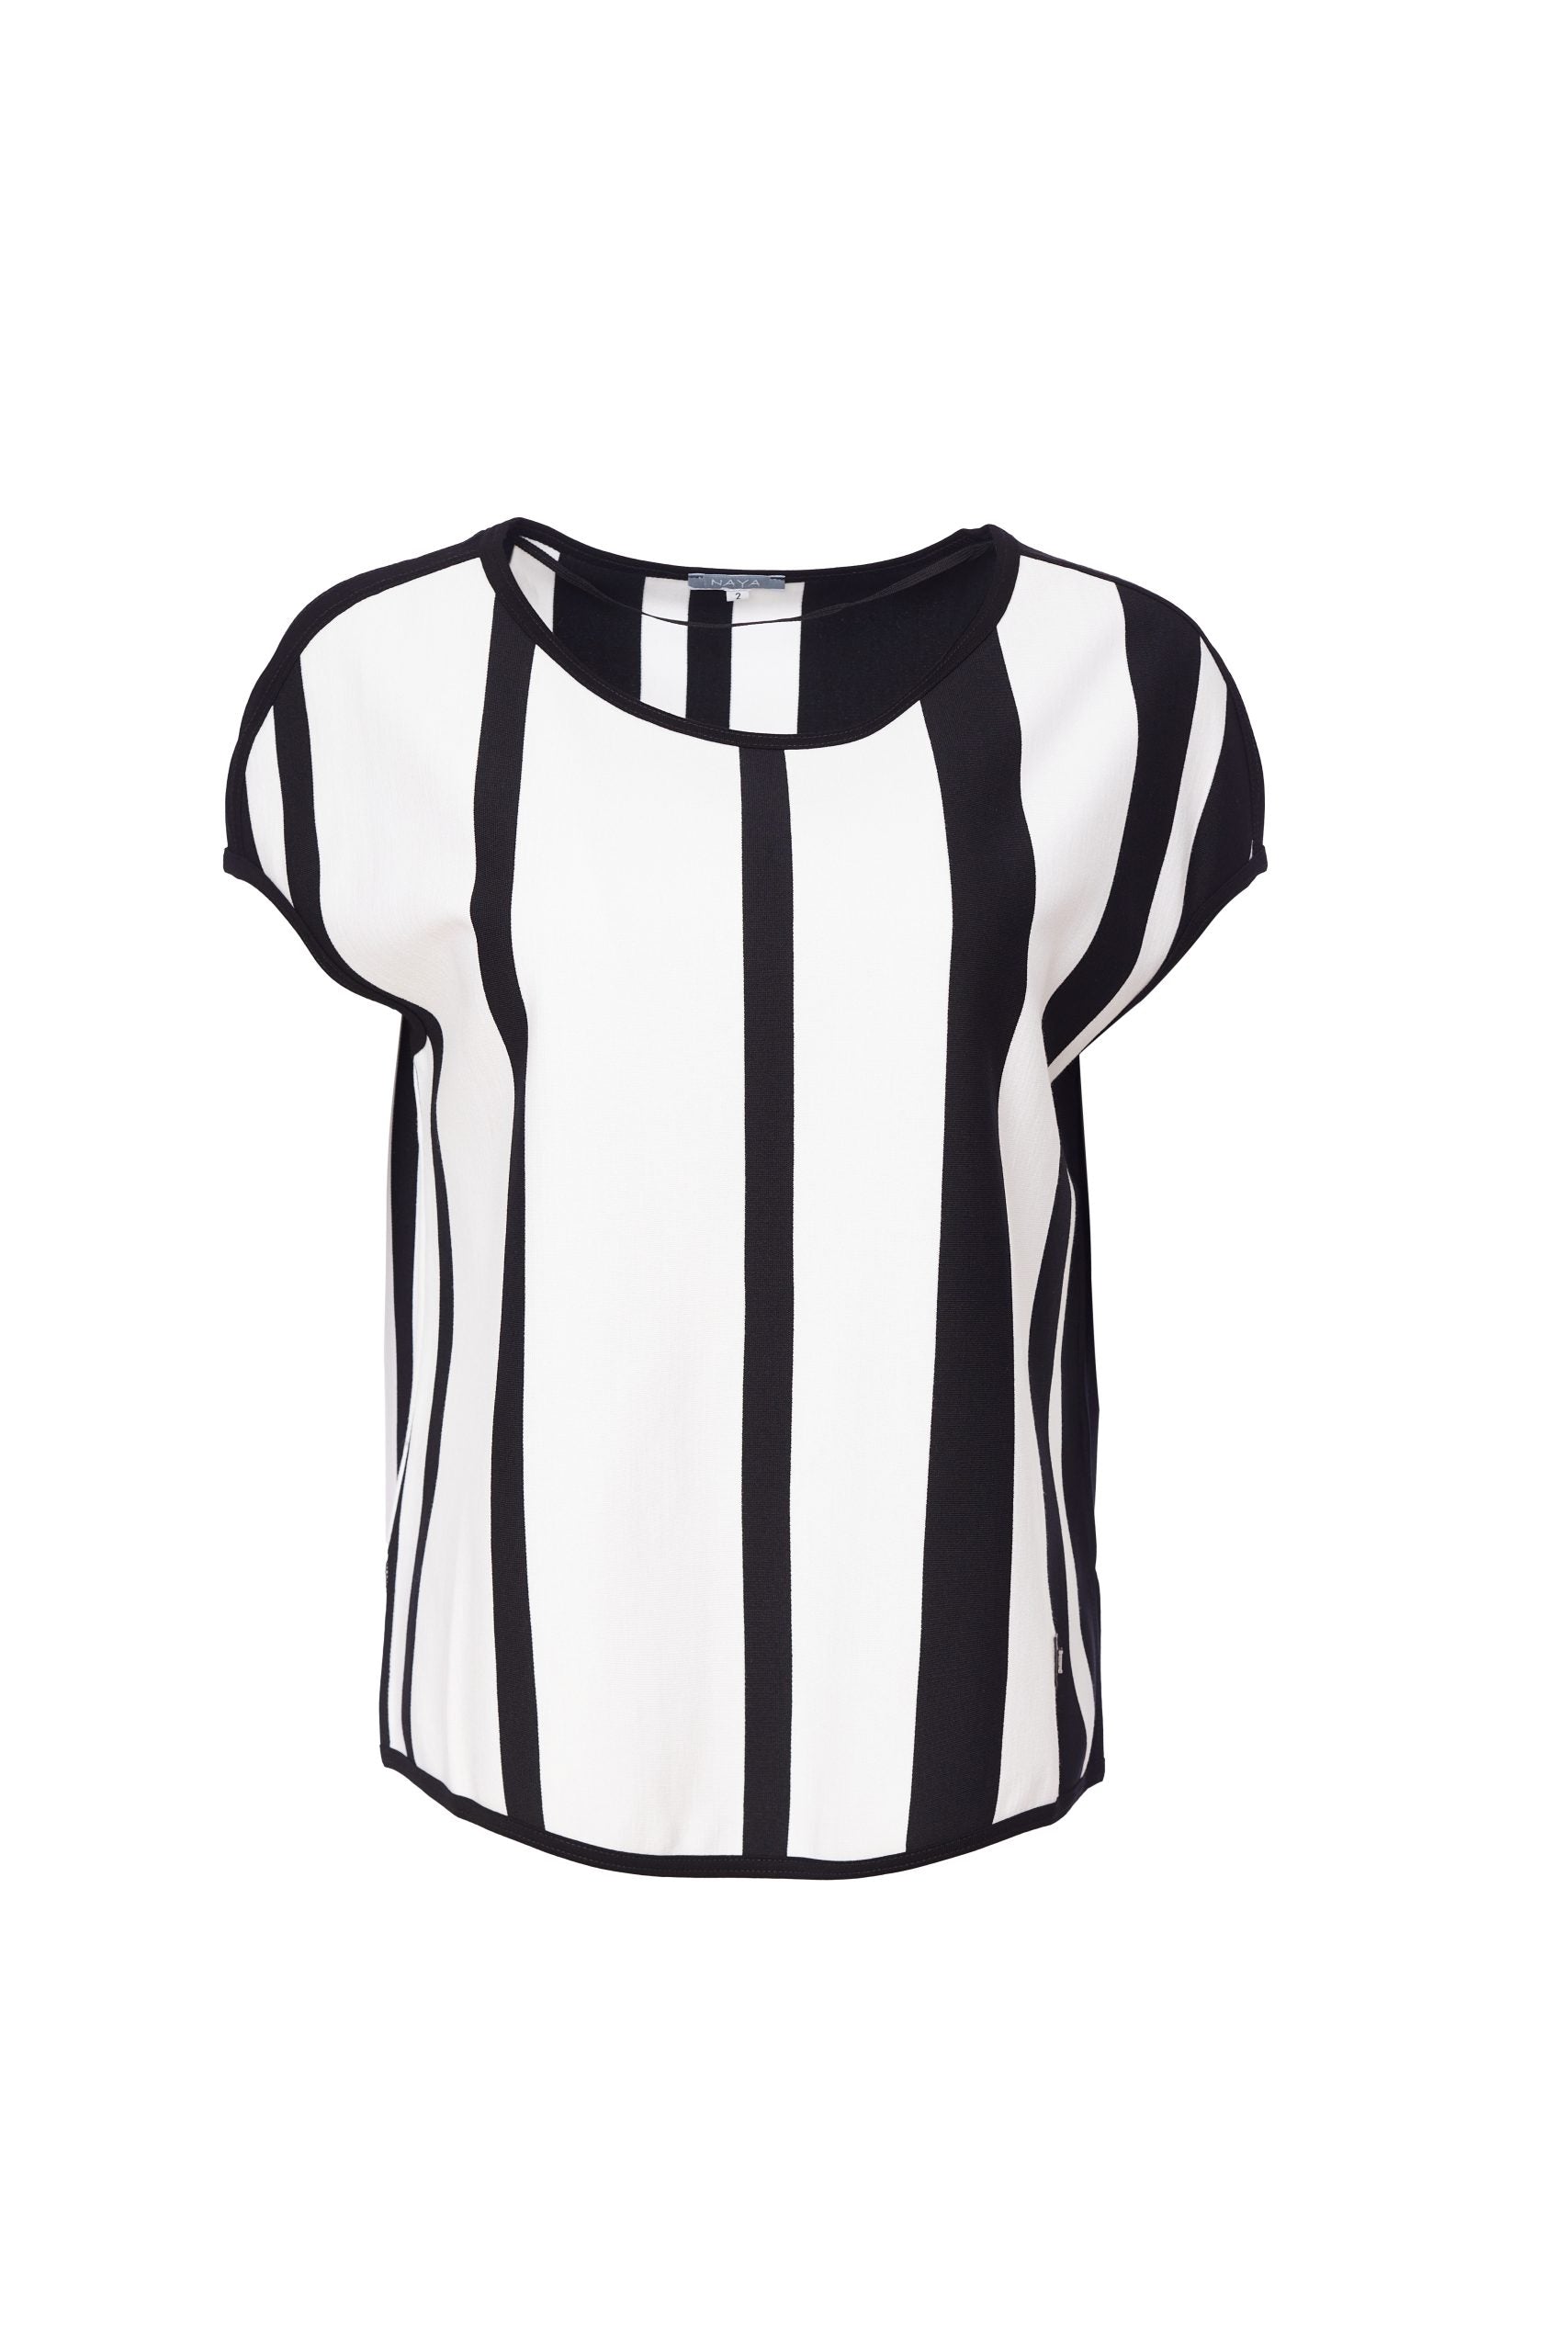 Stripped Round Neck Top in Black and White